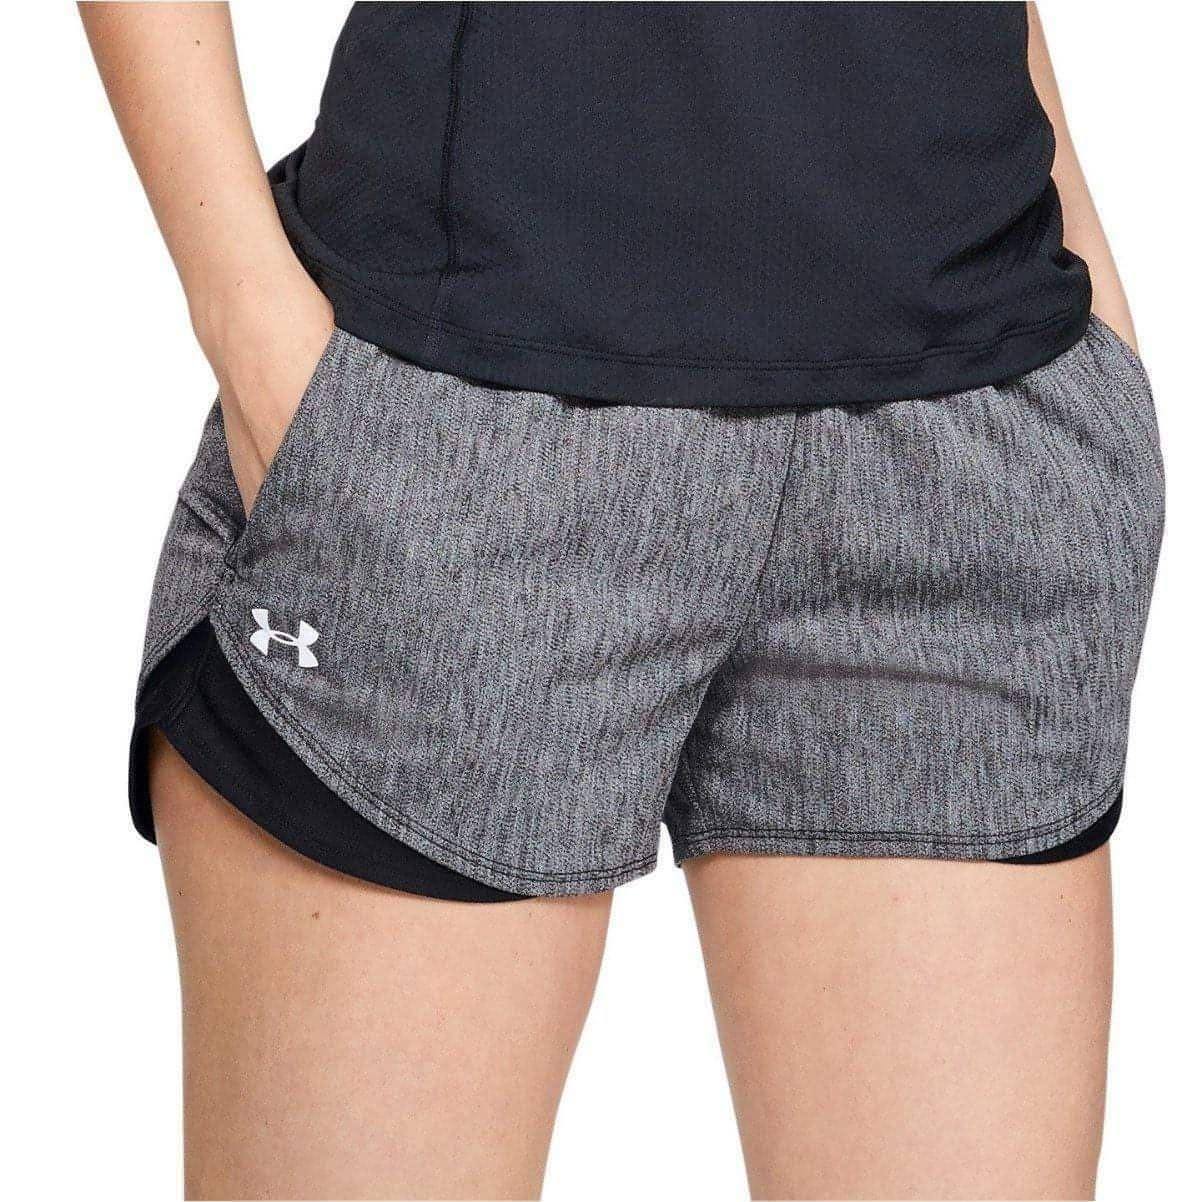 Under Armour Play Up 3.0 Twist Womens Training Shorts - Grey - Start Fitness